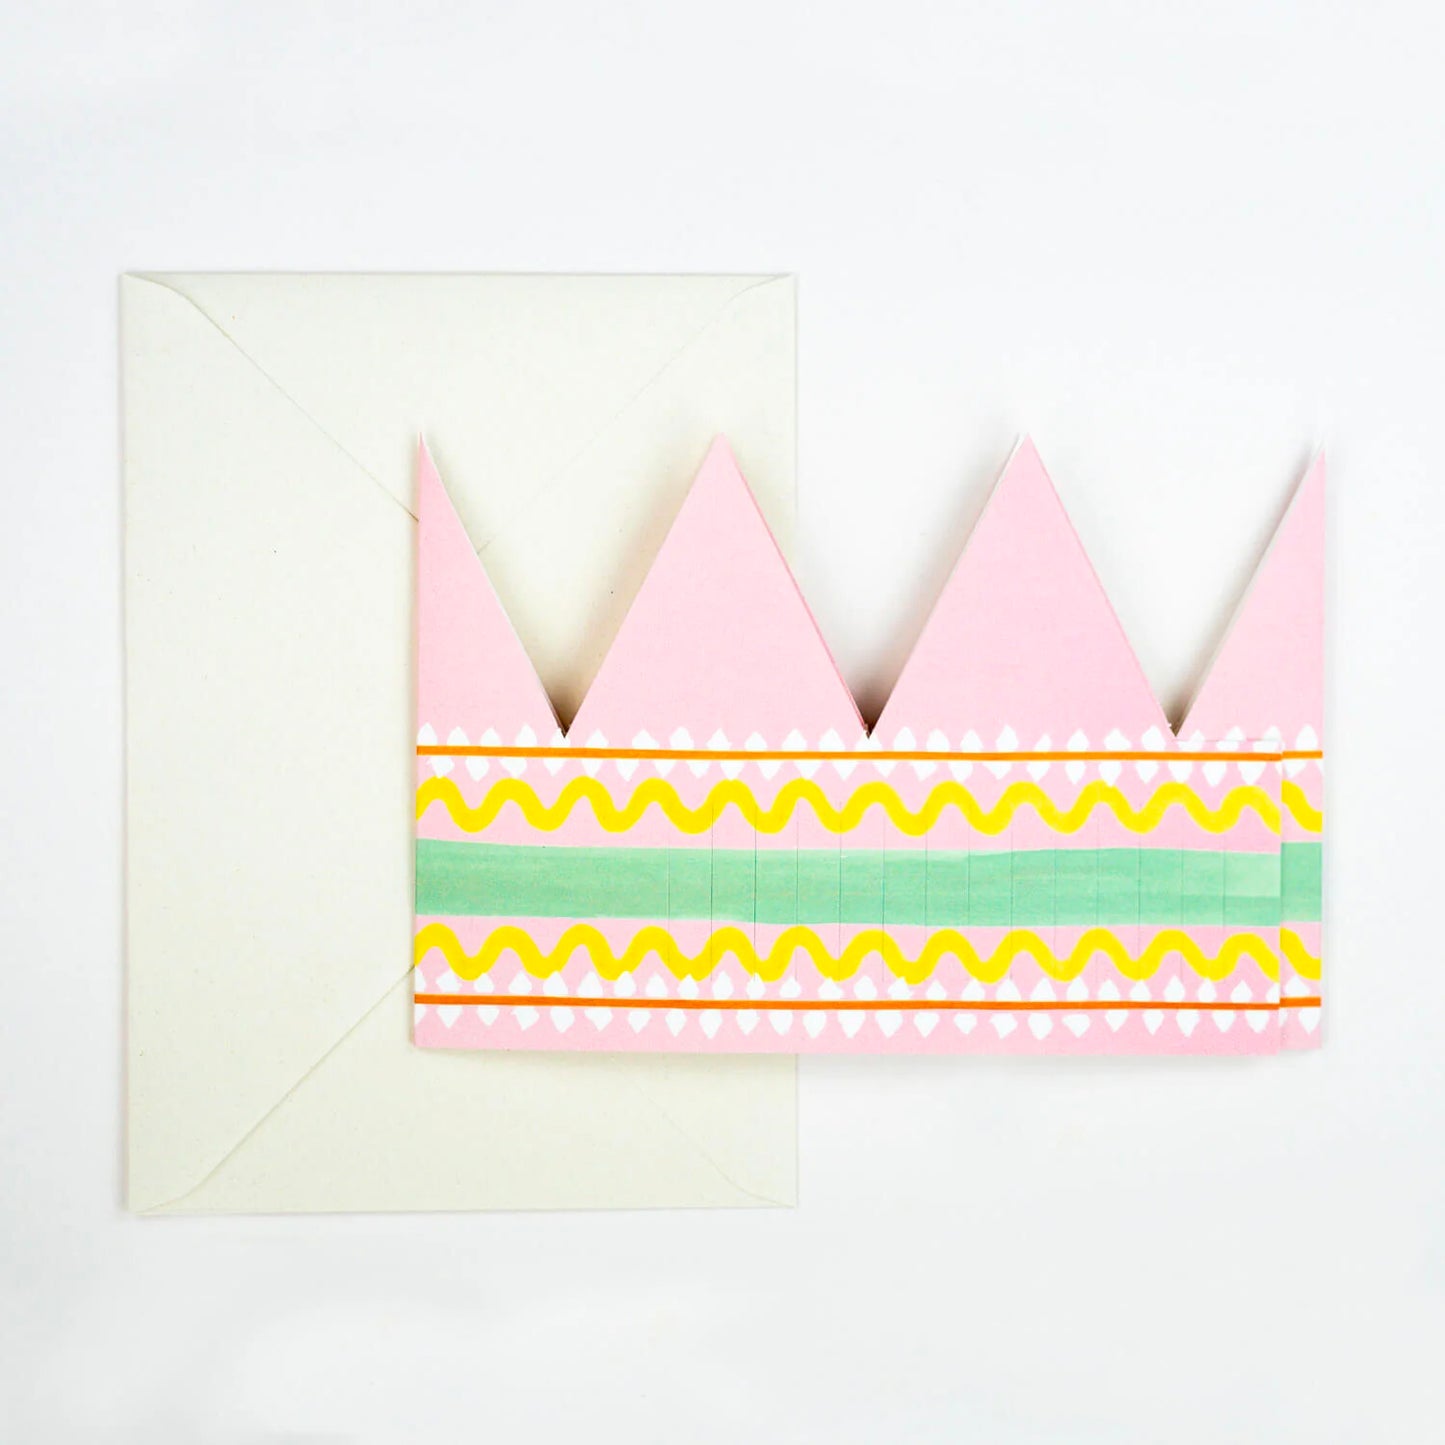 Birthday Queen Party Hat Card